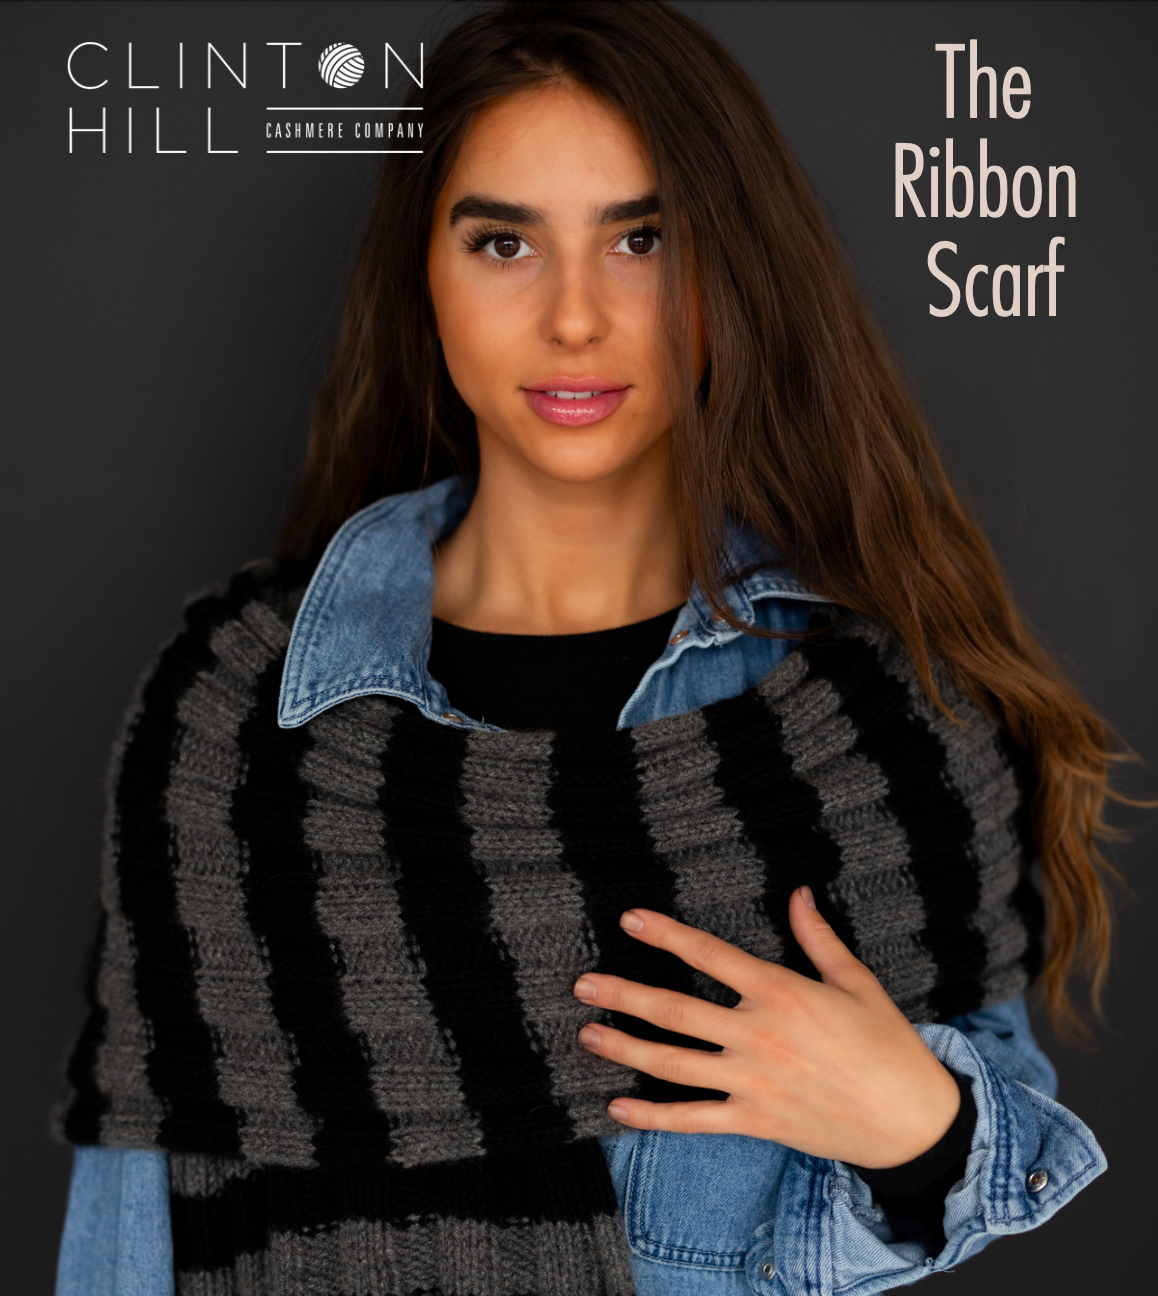 Ribbon Scarf Pattern by Clinton Hill Cashmere Clinton Hill Cashmere